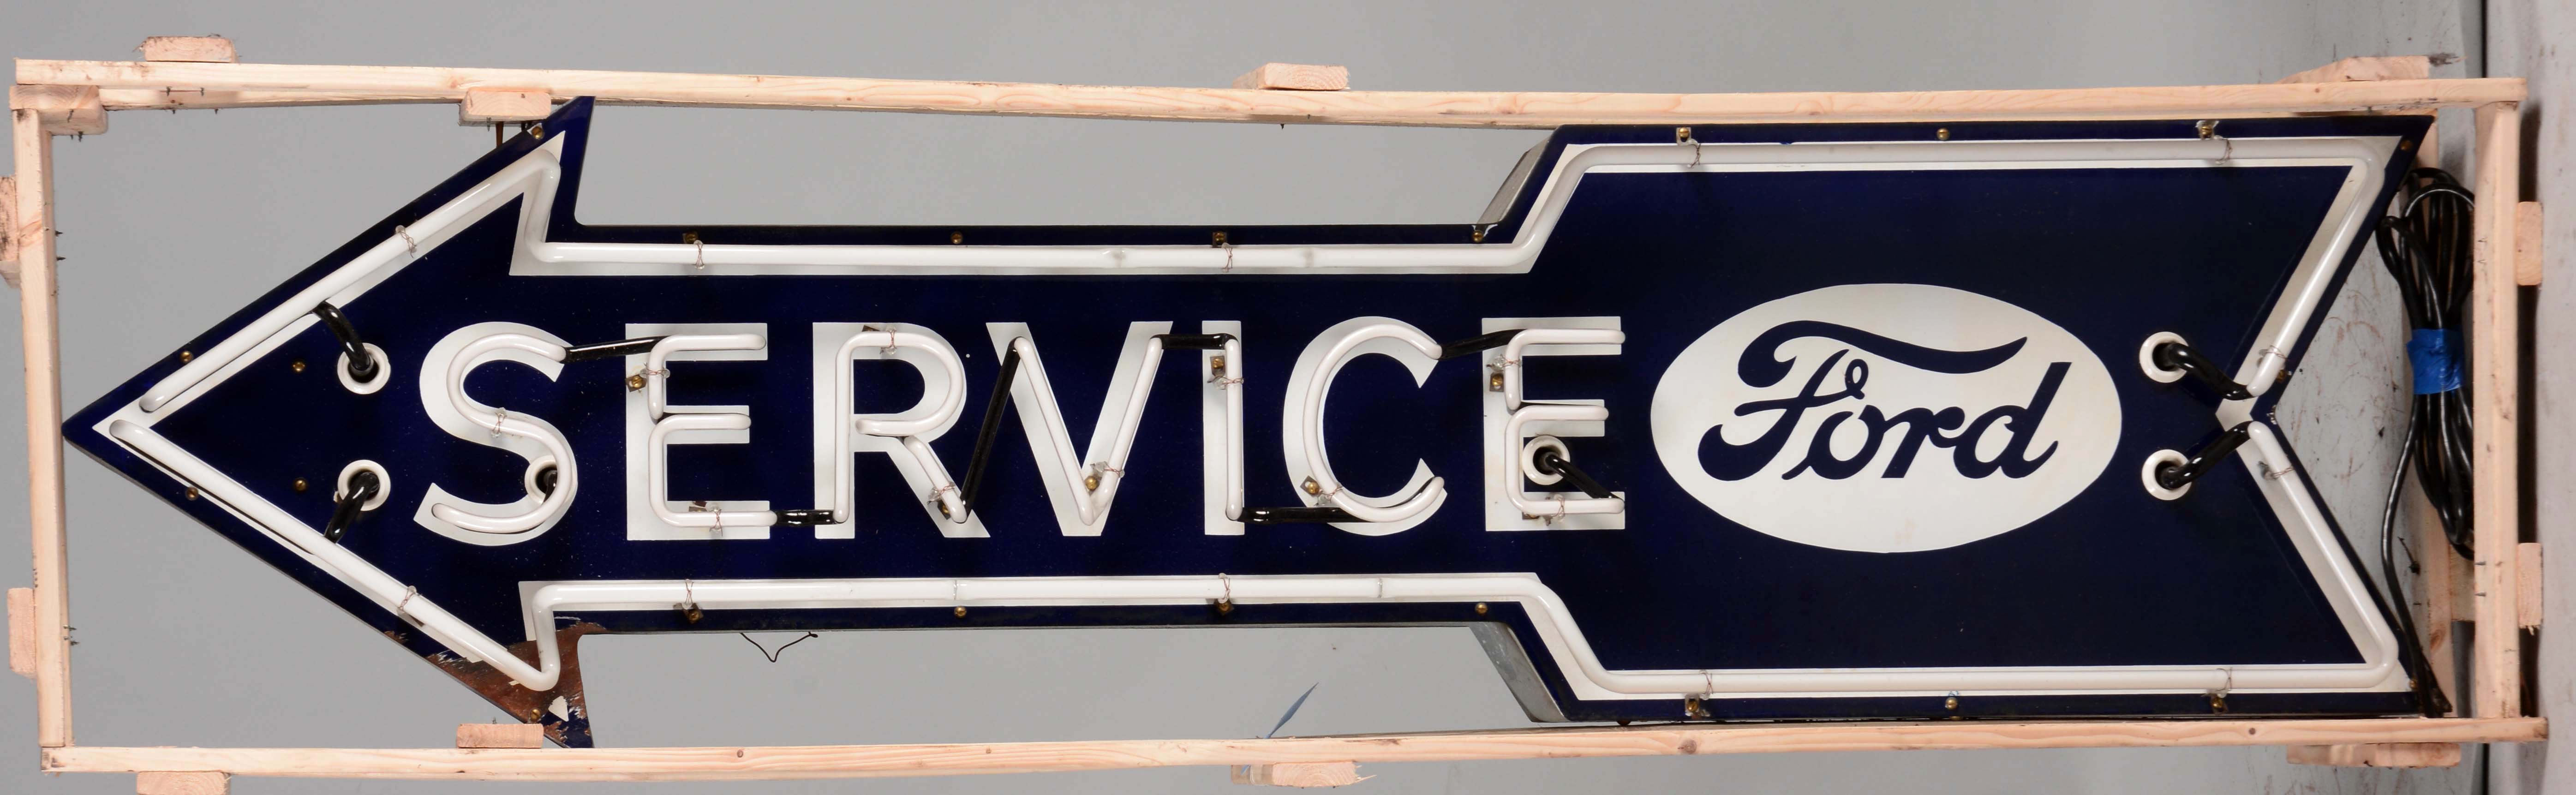 Ford Service Porcelain Neon Arrow Sign, estimated at $6,000-12,000.